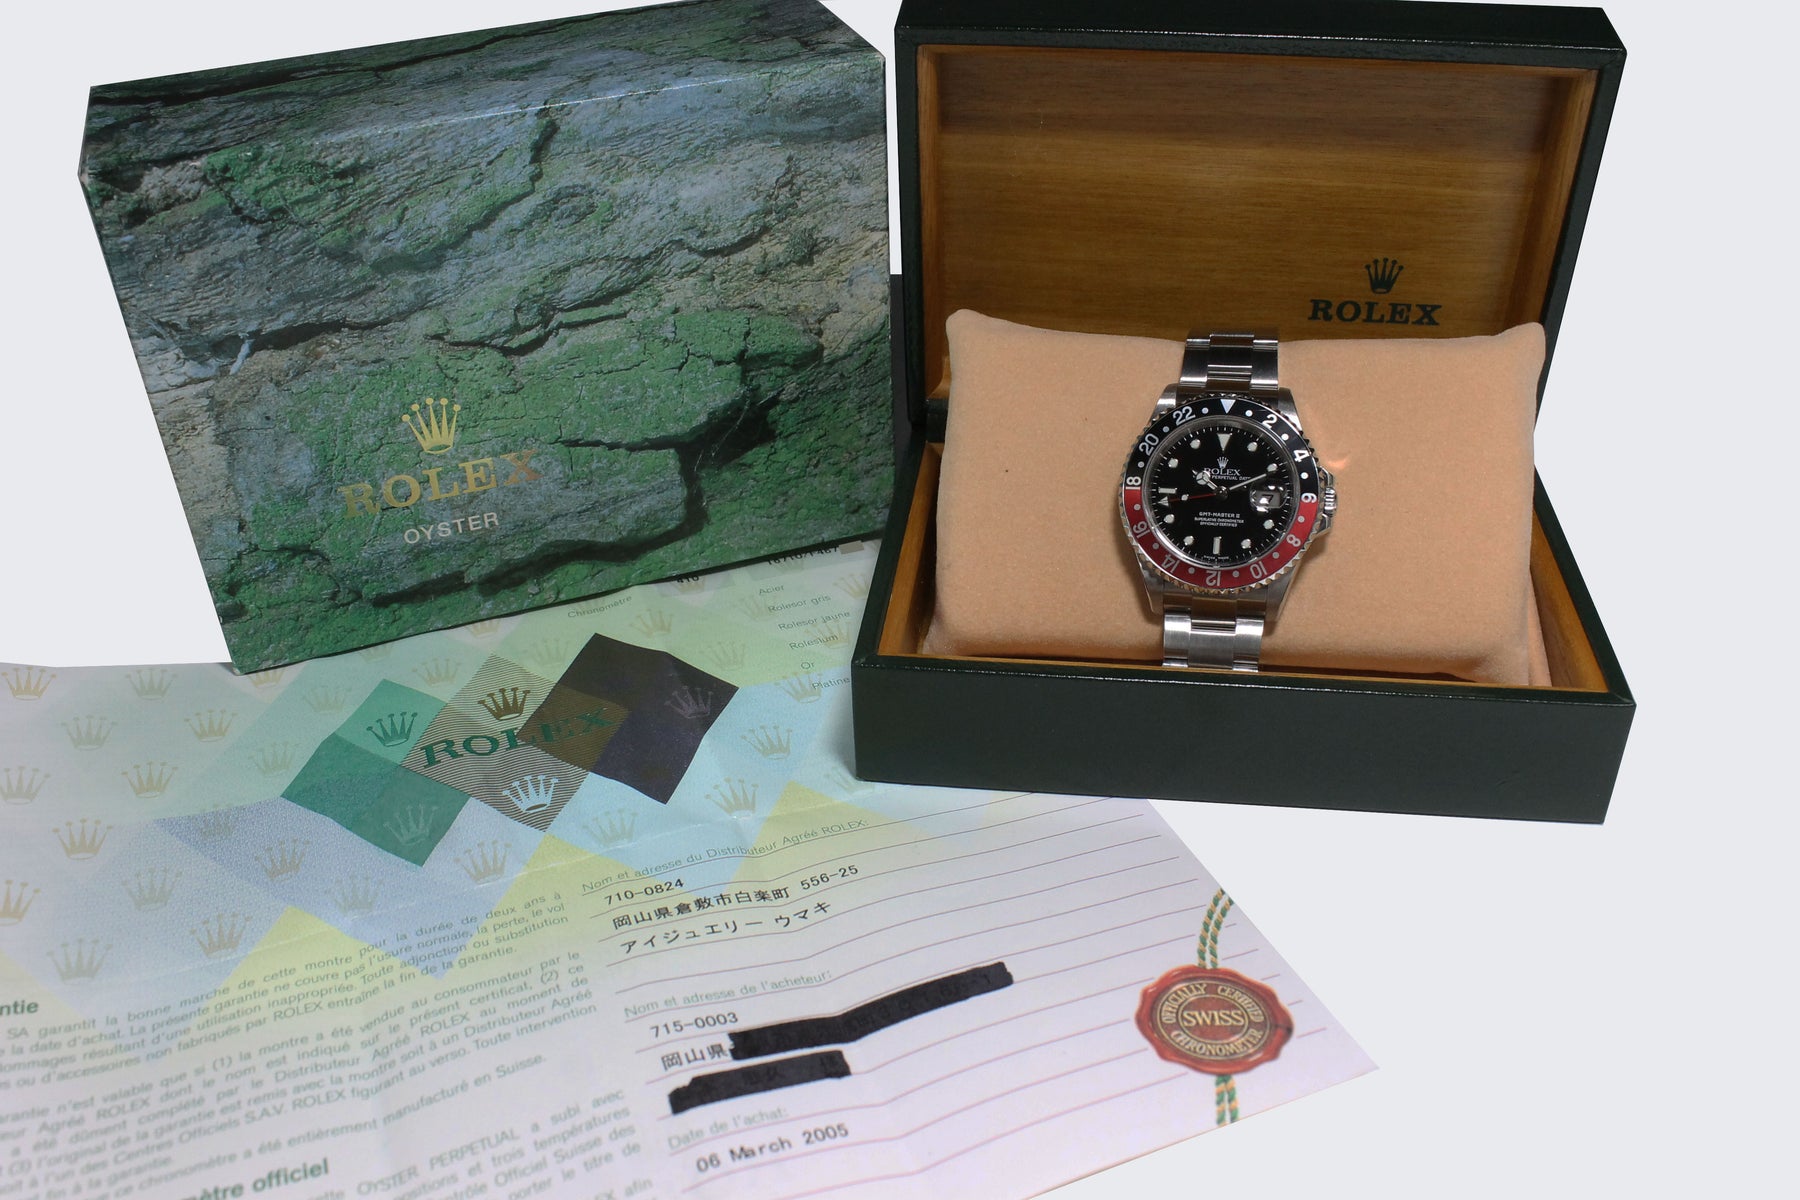 2004 Rolex GMT Master II Ref. 16710 (with Box & Certificate)